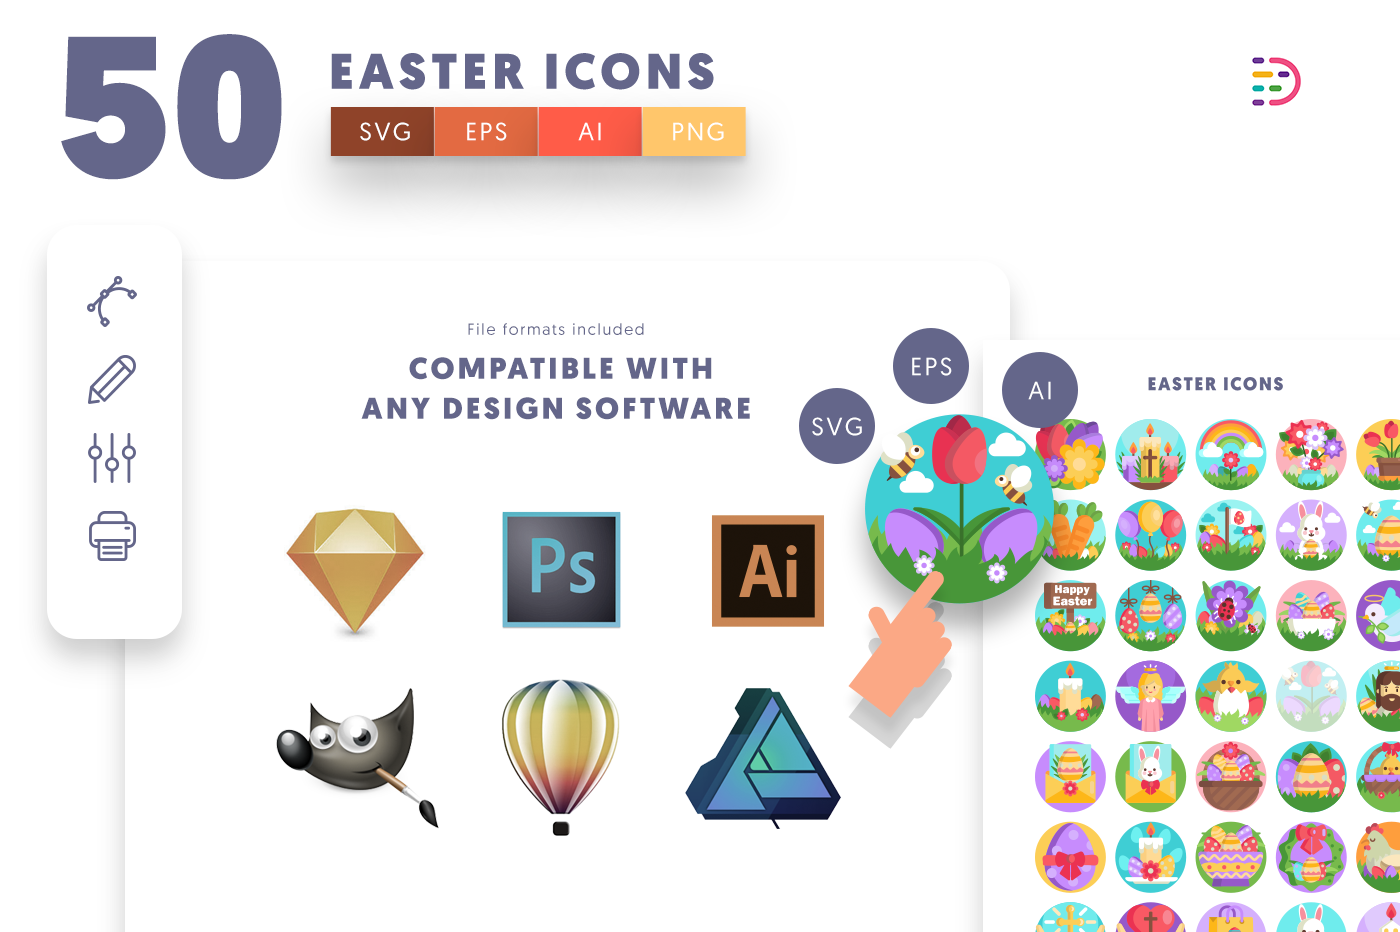 Compatible 50 Easter Icons pack